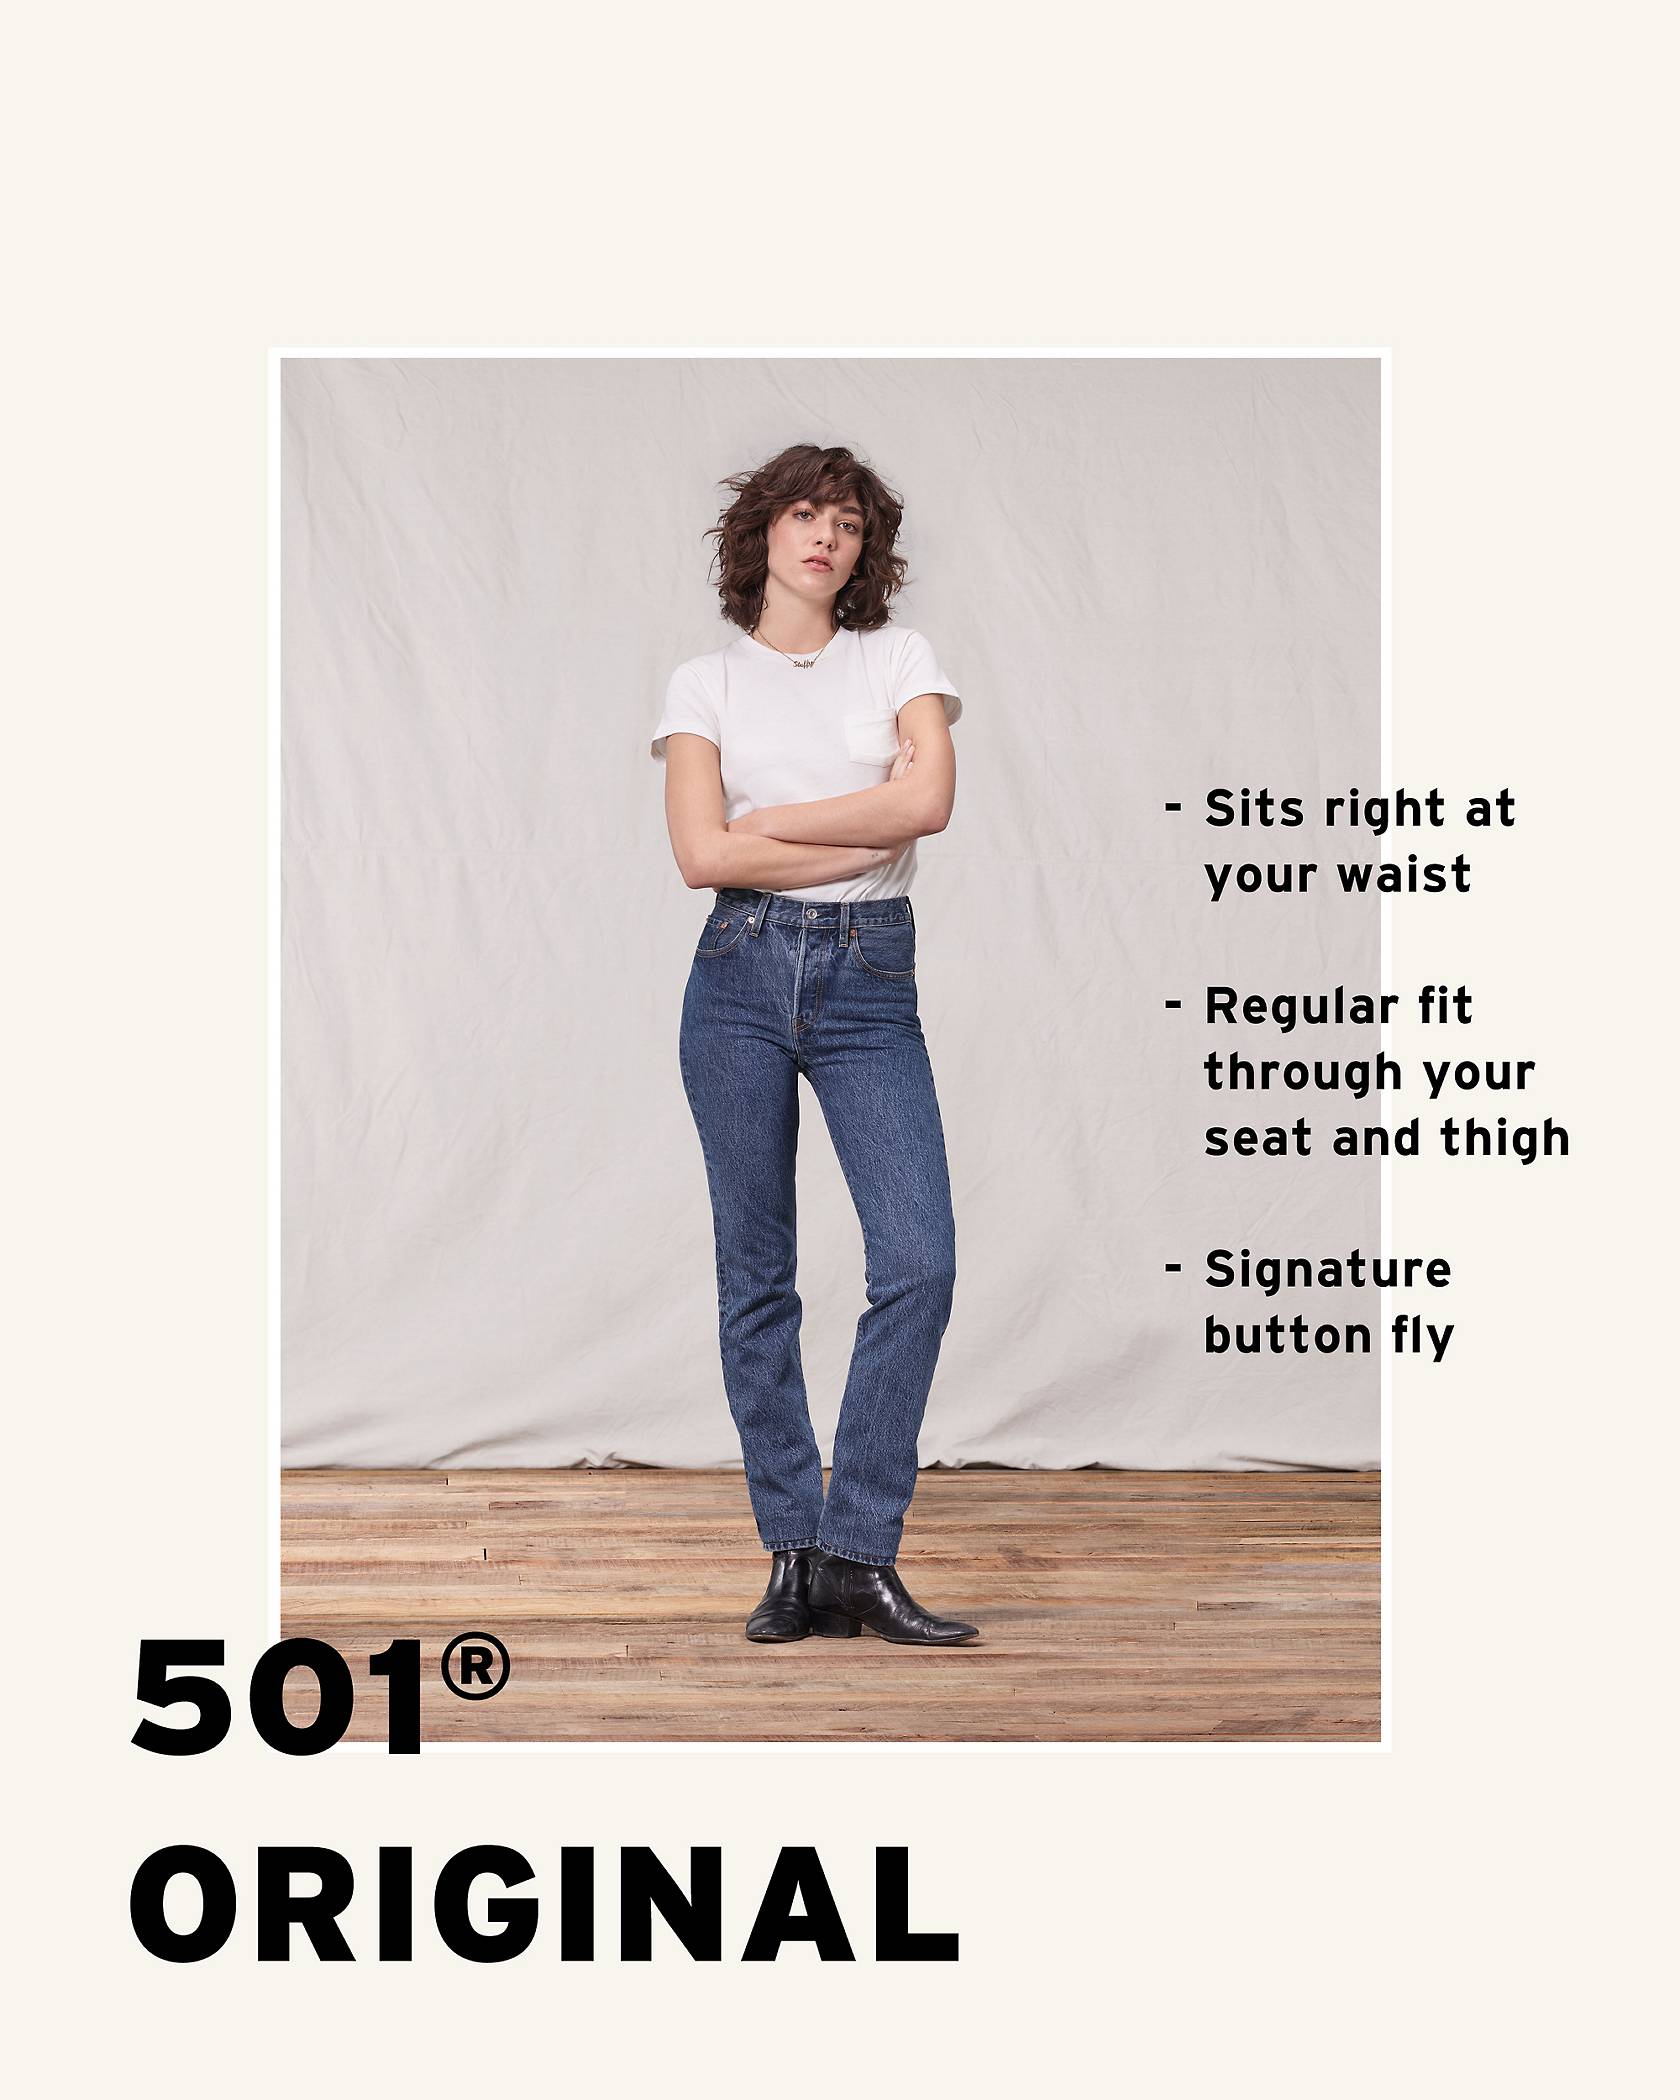 Model wearing a white tee shirt, medium wash 501® Original Jeans, while crossing her arms.